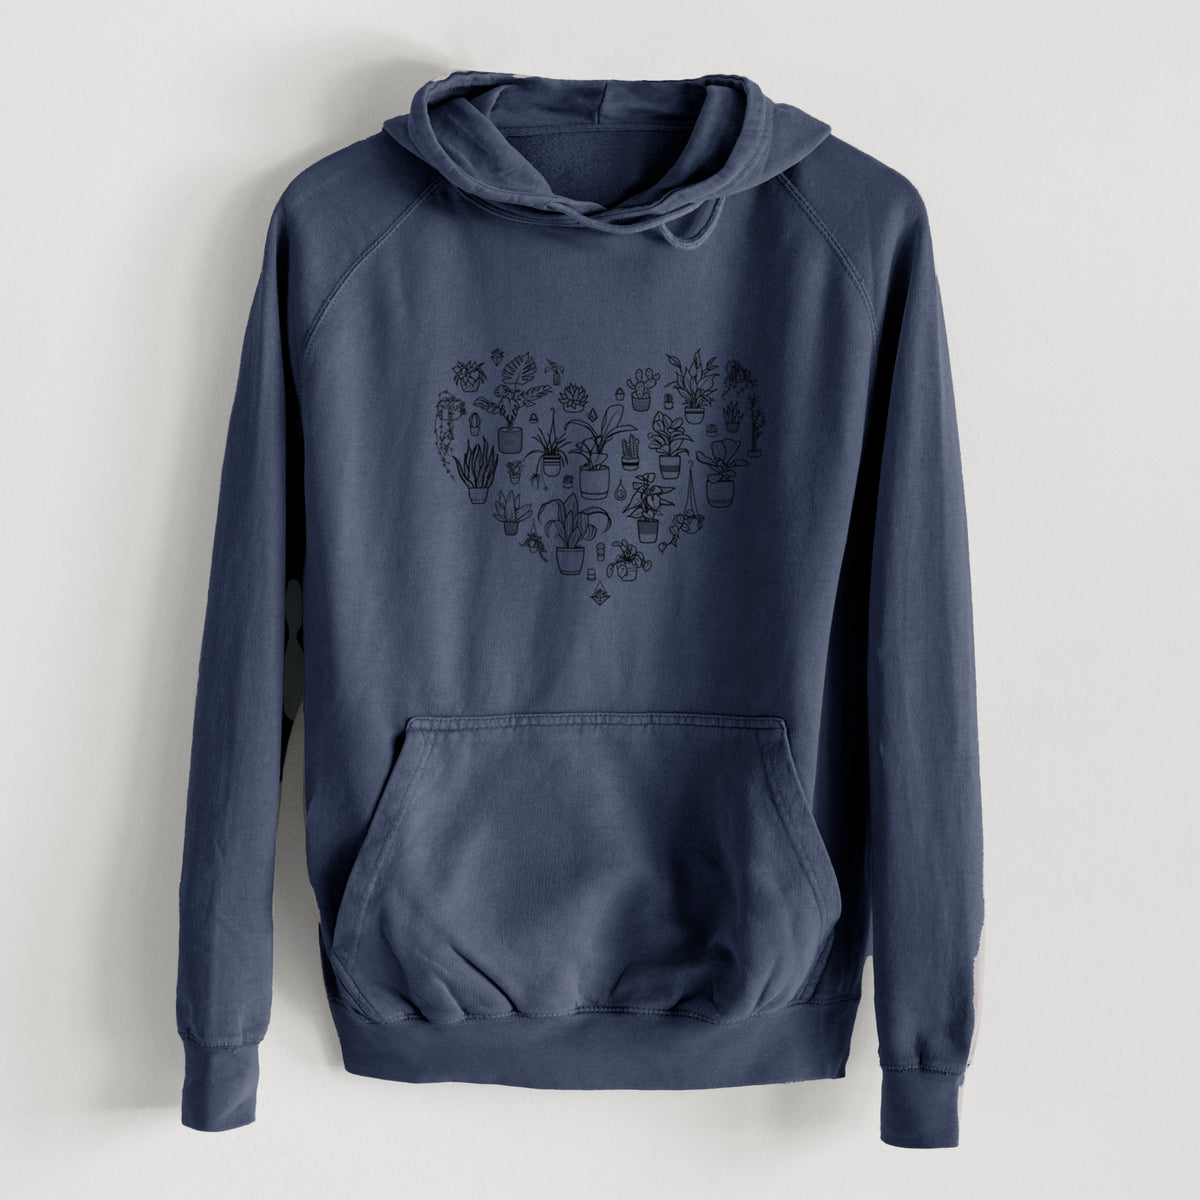 Heart Full of House Plants  - Mid-Weight Unisex Vintage 100% Cotton Hoodie